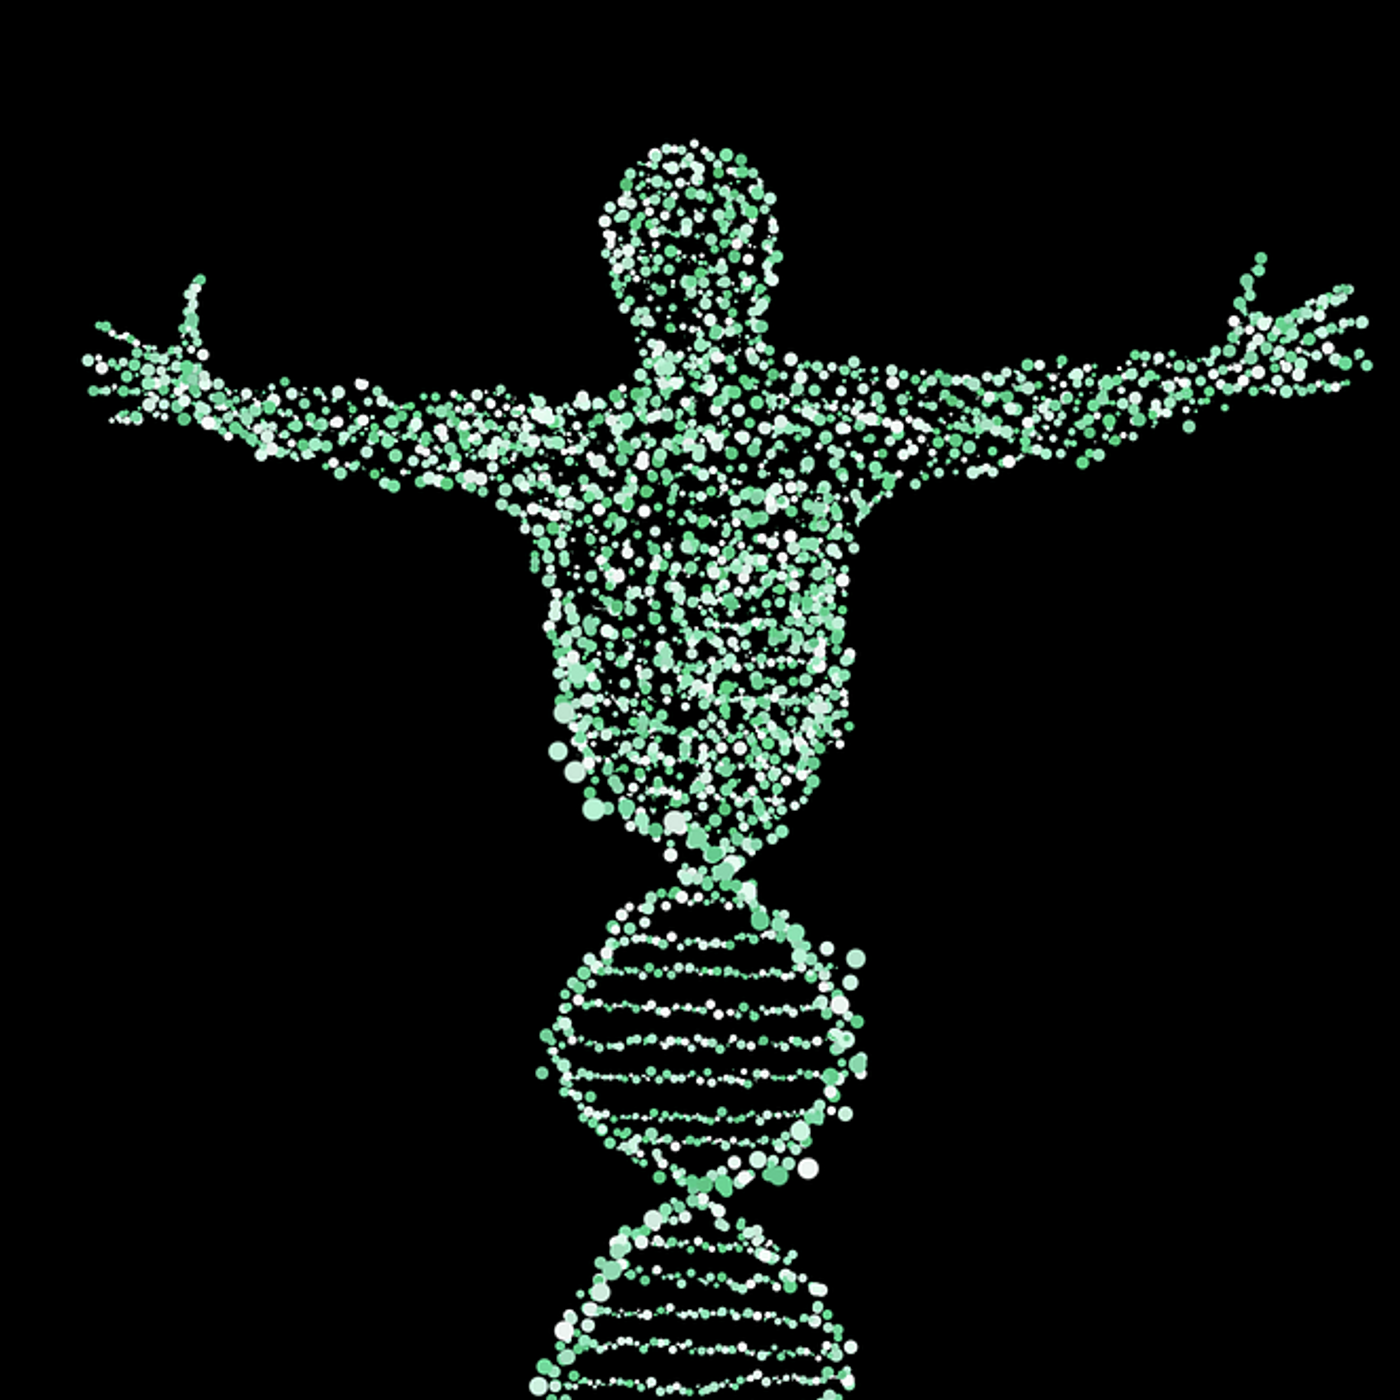 Our DNA can reveal things we did not know about ourselves. / Image credit: Maxpixel